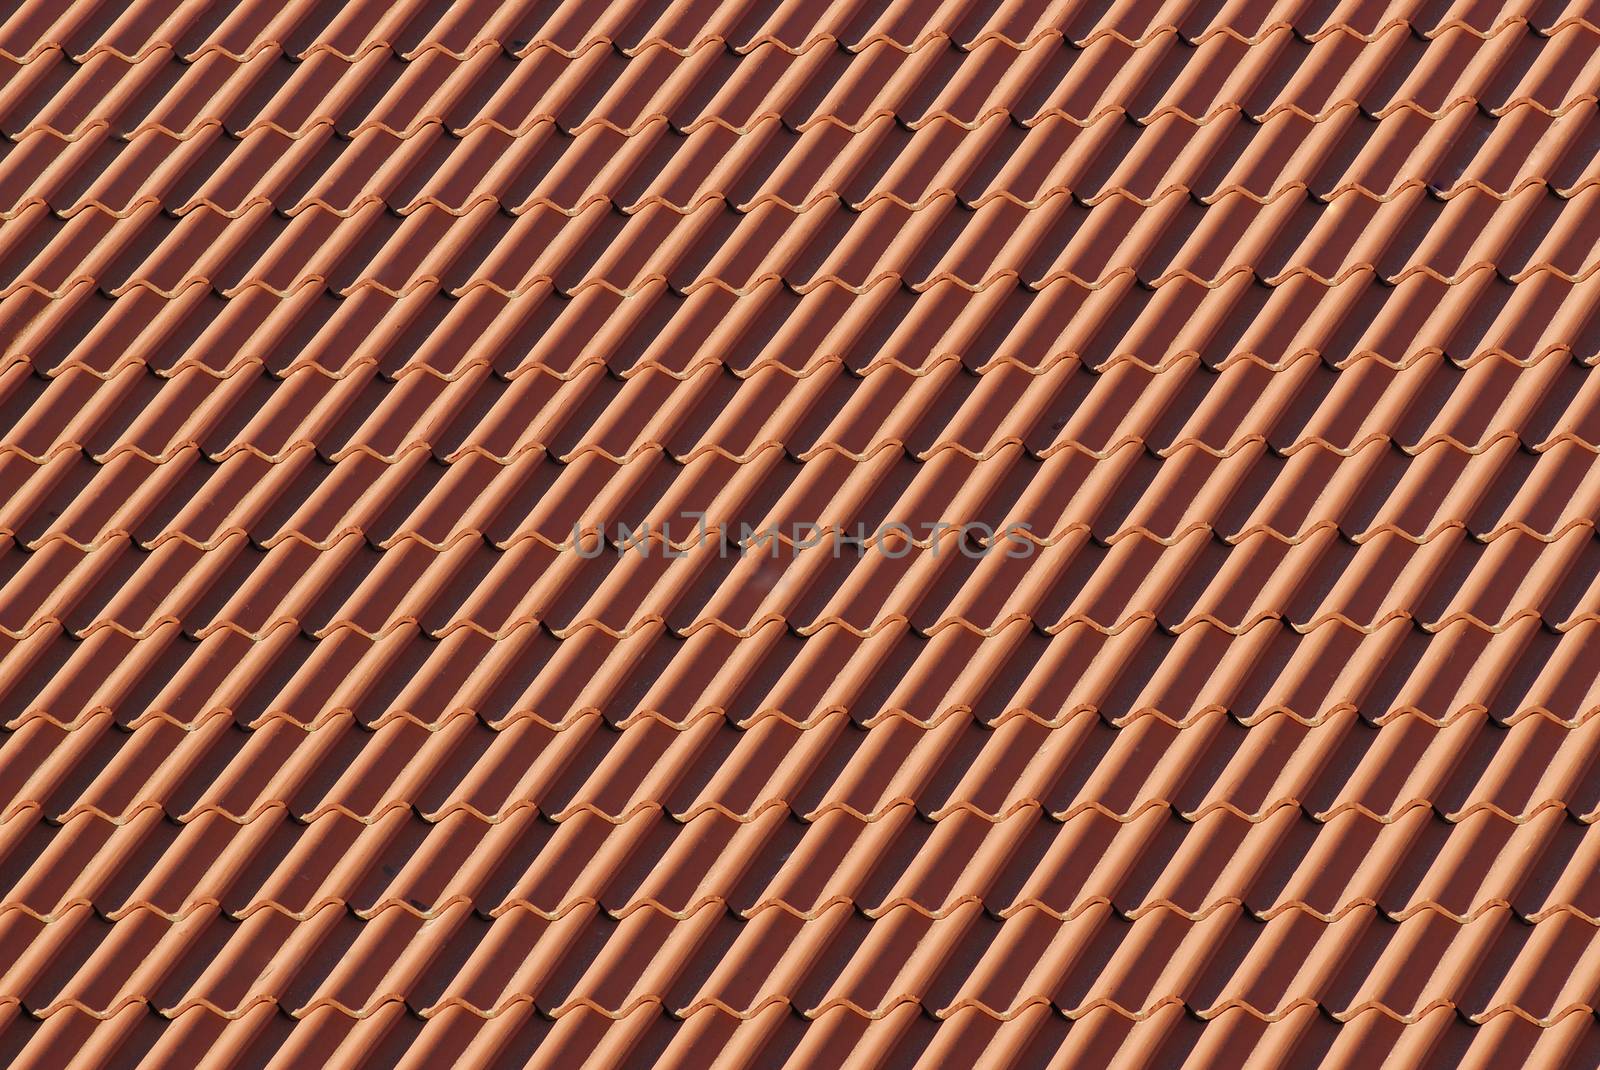 Close-up of red roof tiles - shallow depth of field